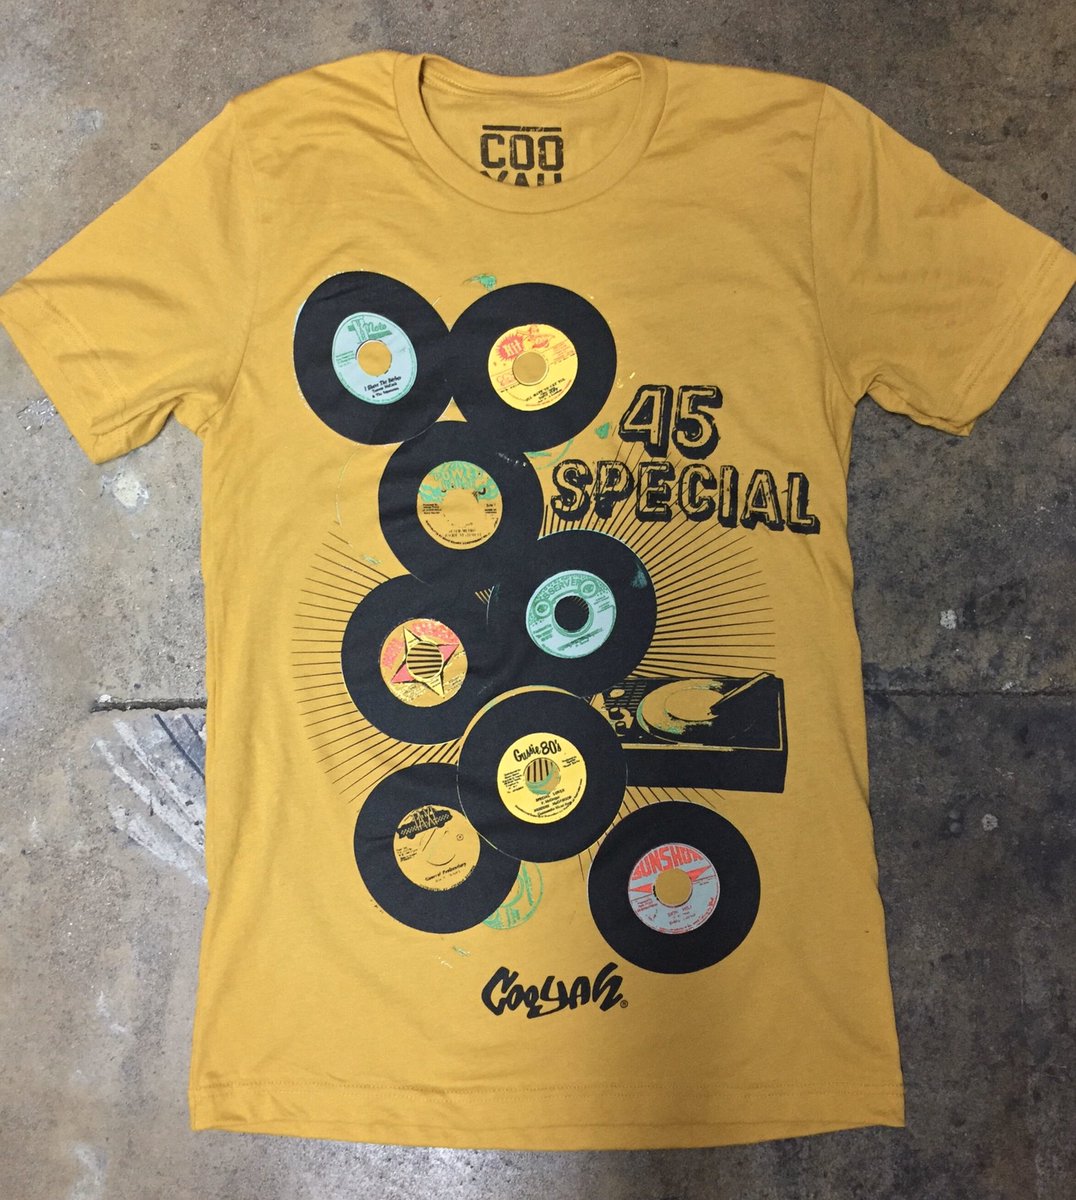 Back in stock: 45 Special classic tees available in new colors at cooyah.com/products/45-rp…
#Cooyah #Classic #Design #irie #Records #Vinyl #VinylCollection #reggae #rocksteady #ska #Jamaica
#vintagereggae #vintagefashion